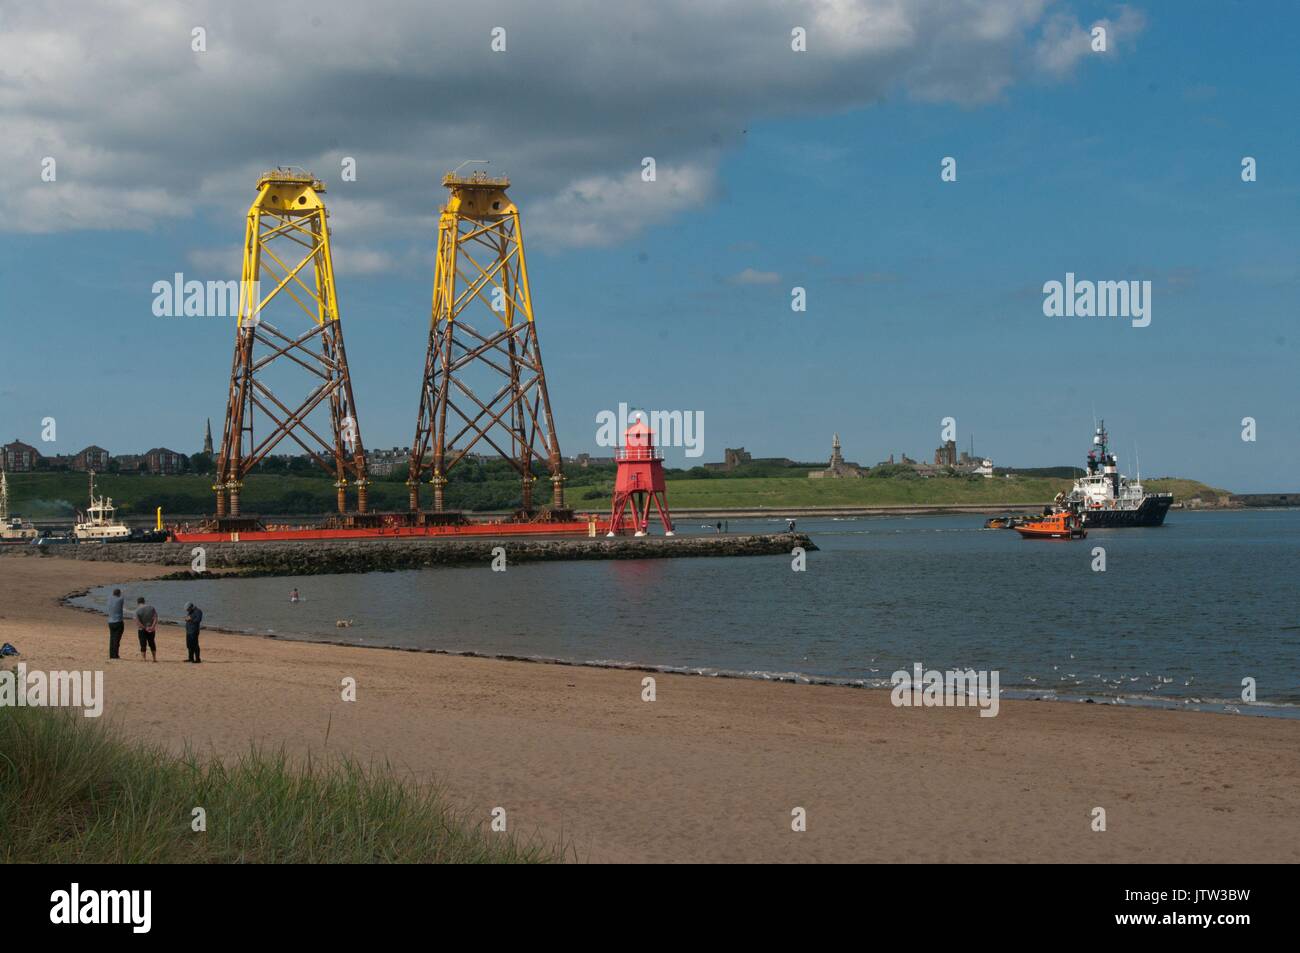 River Tyne, South Shields, UK, 10th August 2017. Wind turbine foundations being towed past The Groyne, South Shields on their way to the Beatrice offshore wind farm in the Moray Firth. Due to their height National Grid had to raise the height of power cables across the River Tyne despite the pylons being two of the highest in Britain, surpassed only by sets spanning the River Thames near London and the River Severn in Bristol. Credit: Colin Edwards/Alamy Live News. Stock Photo